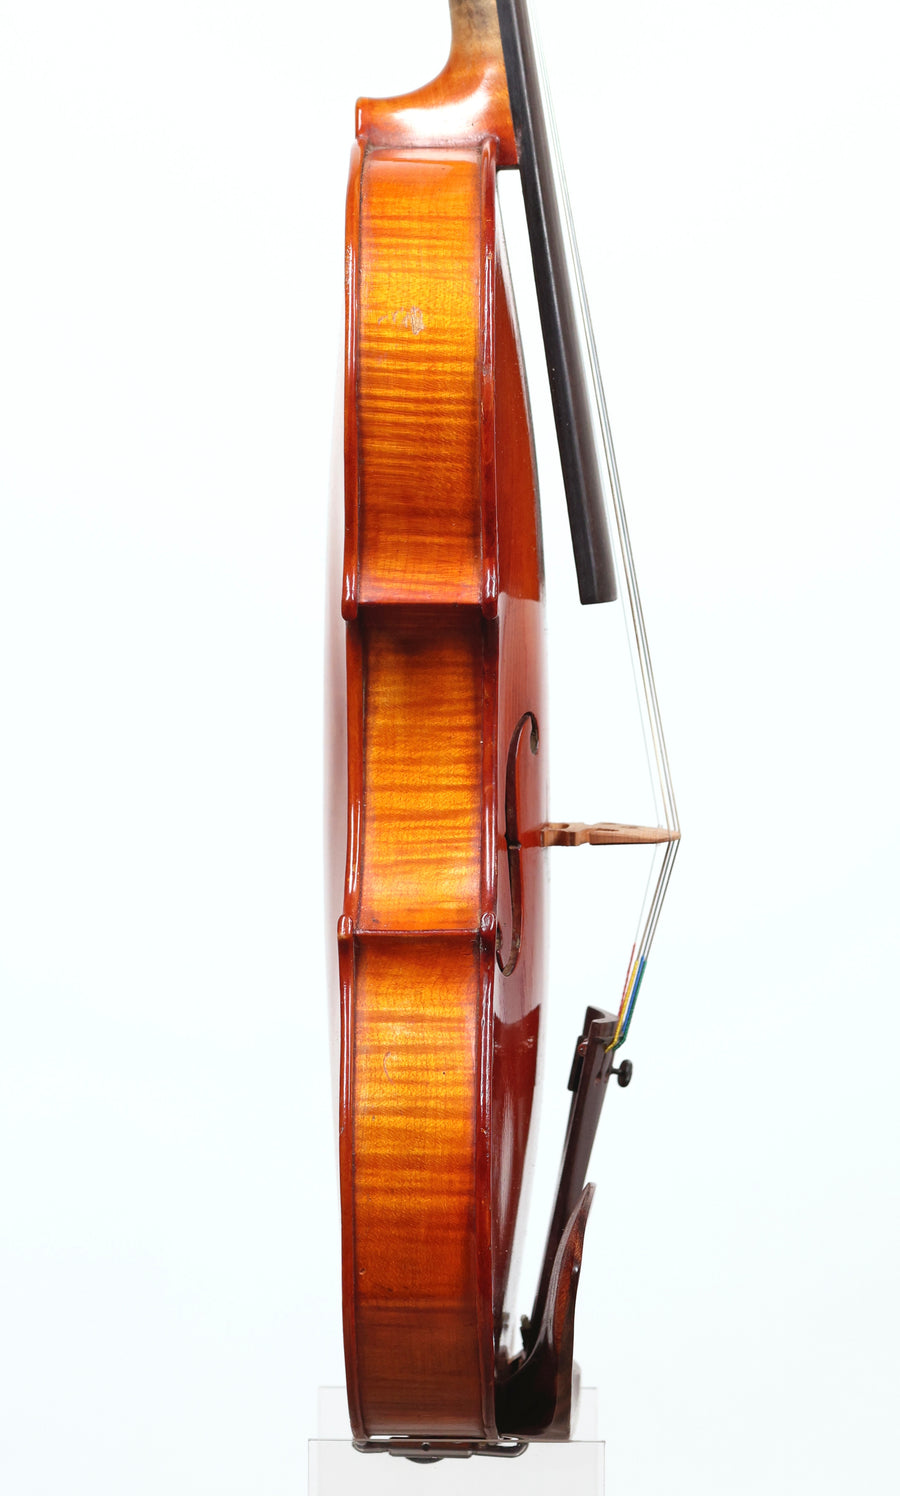 A Good 19th Century French Violin, Mirecourt